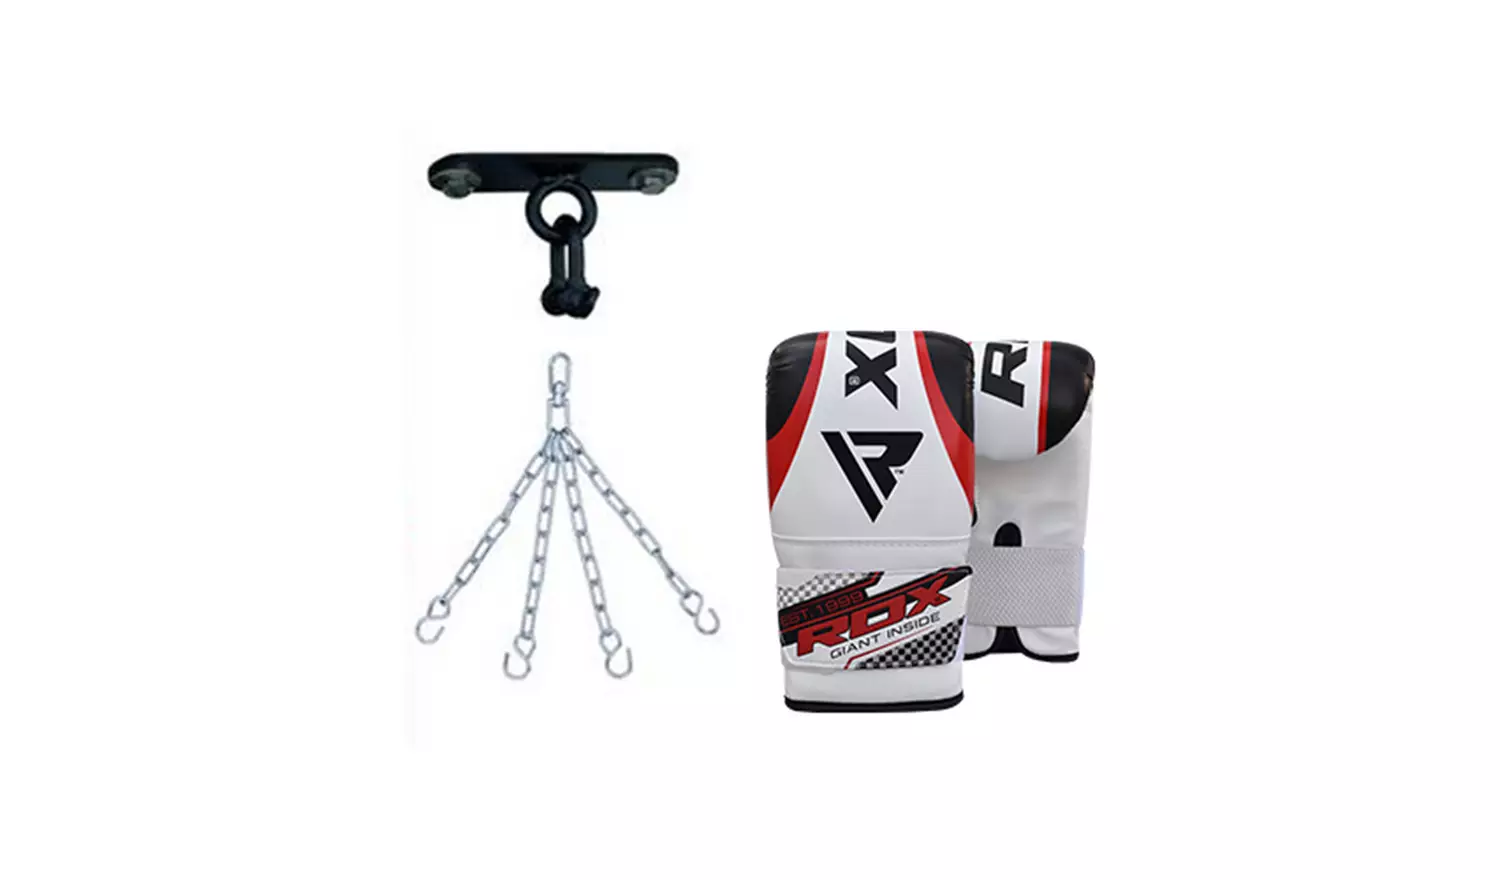 RDX 4ft Punchbag with Gloves, Chains and Bracket